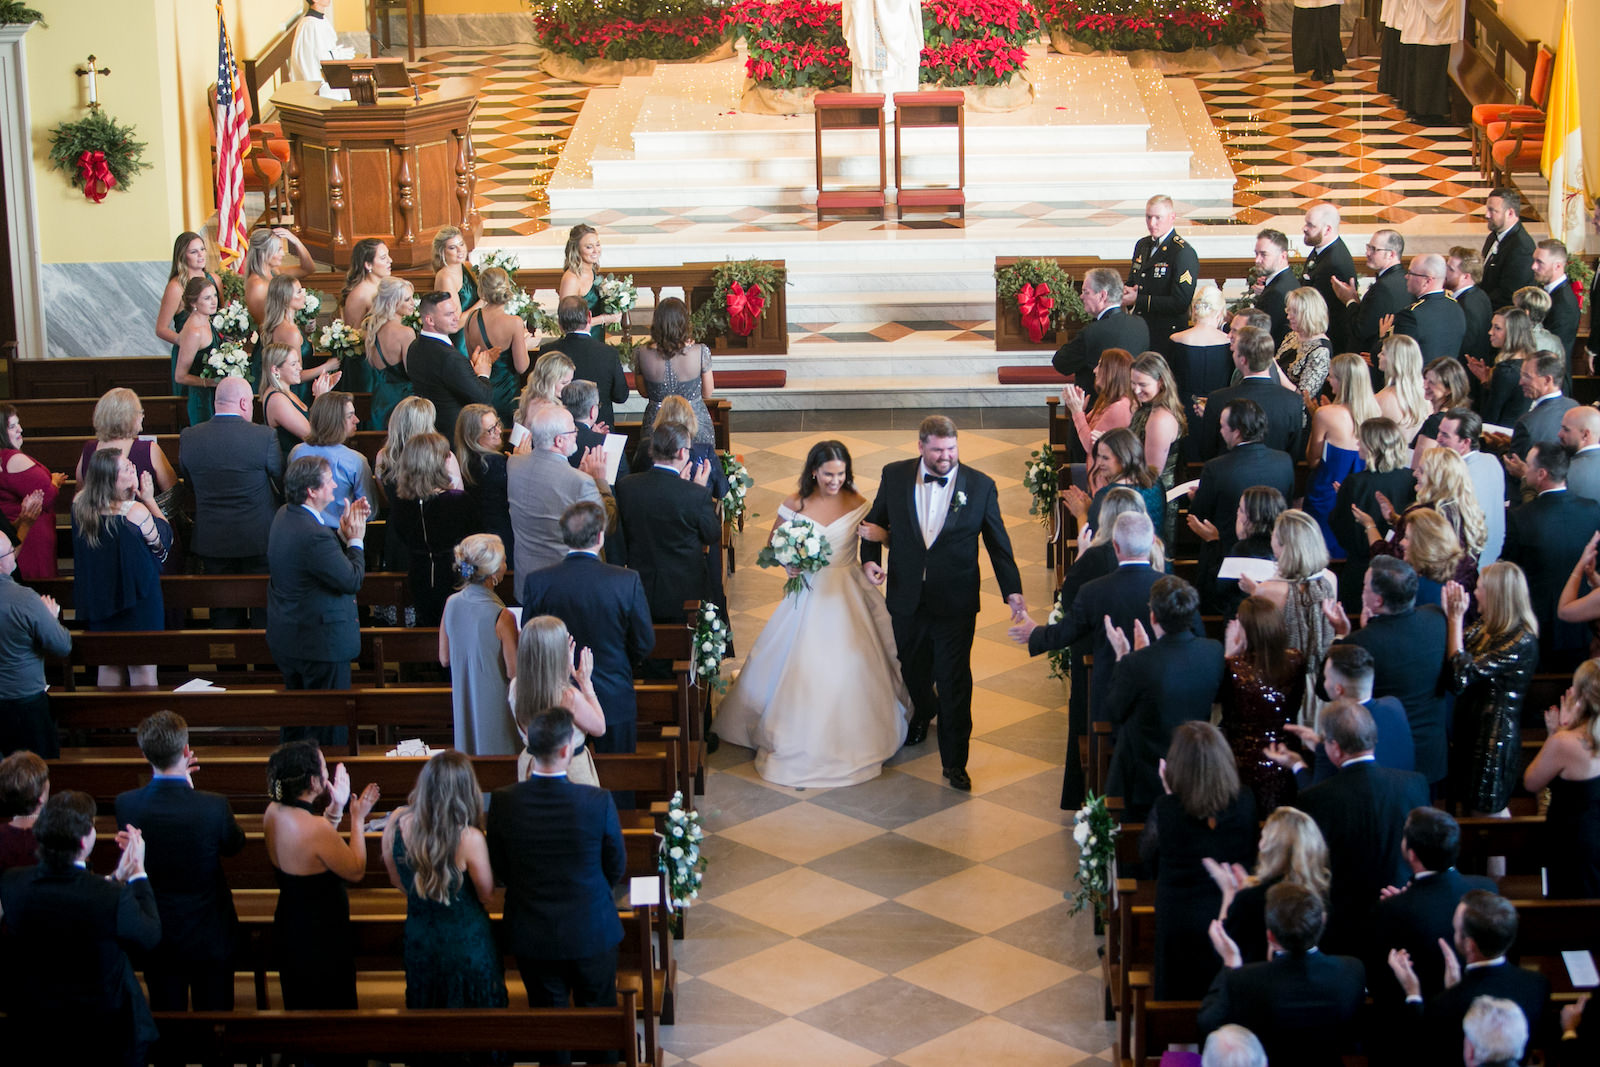 Green and Gold Christmas Wedding, Bride and Groom Exchanging Wedding Vows During Ceremony | Tampa Bay Wedding Photographer Carrie Wildes Photography | Traditional Church Wedding Venue Jesuit High School: Chapel of the Holy Cross